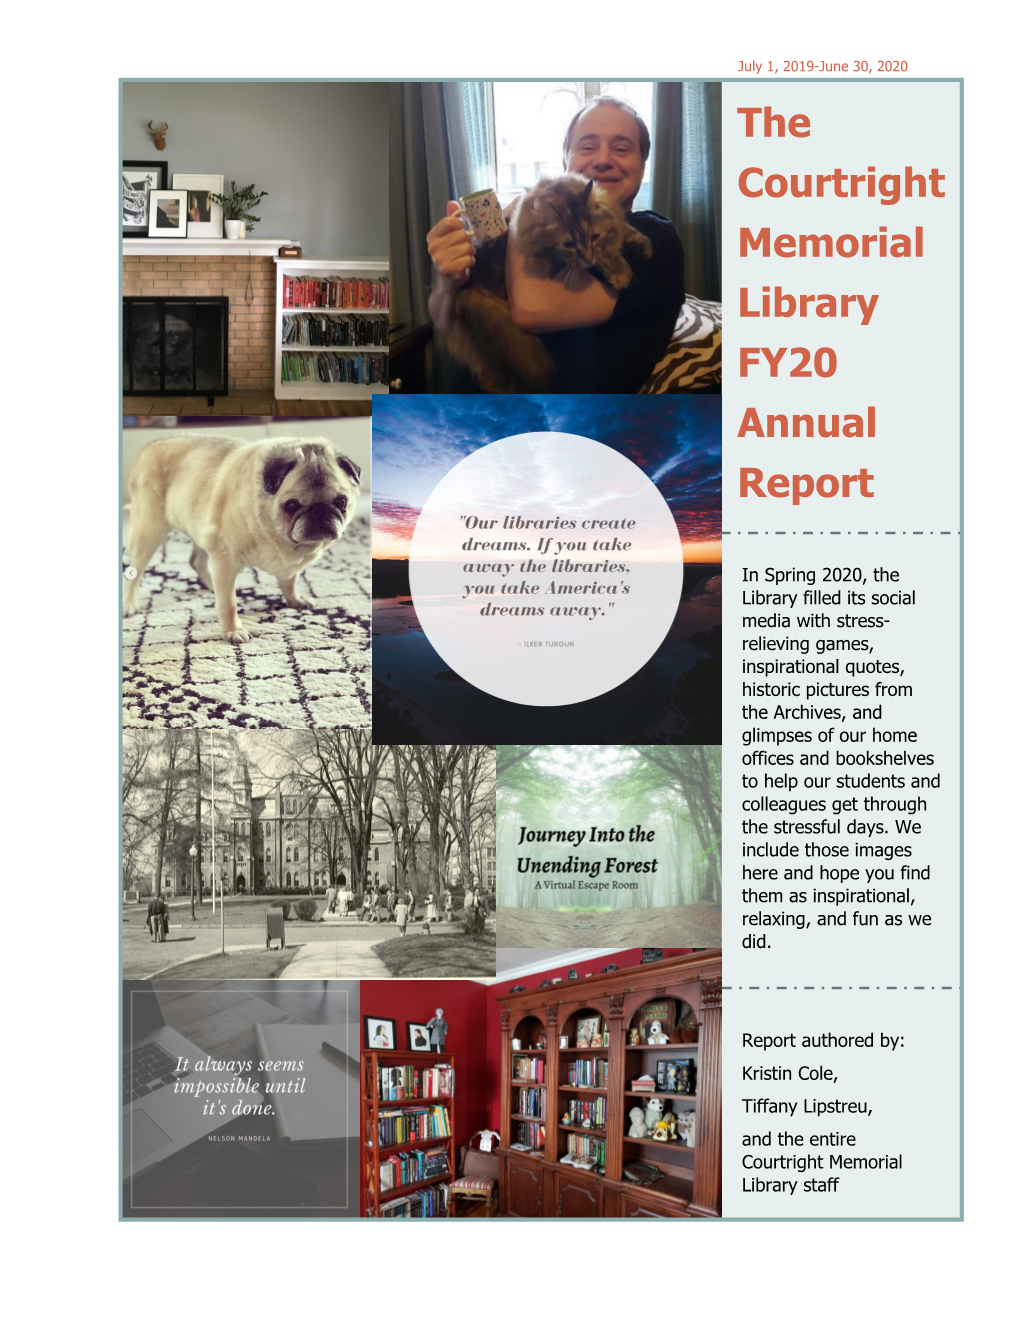 The Courtright Memorial Library FY20 Annual Report